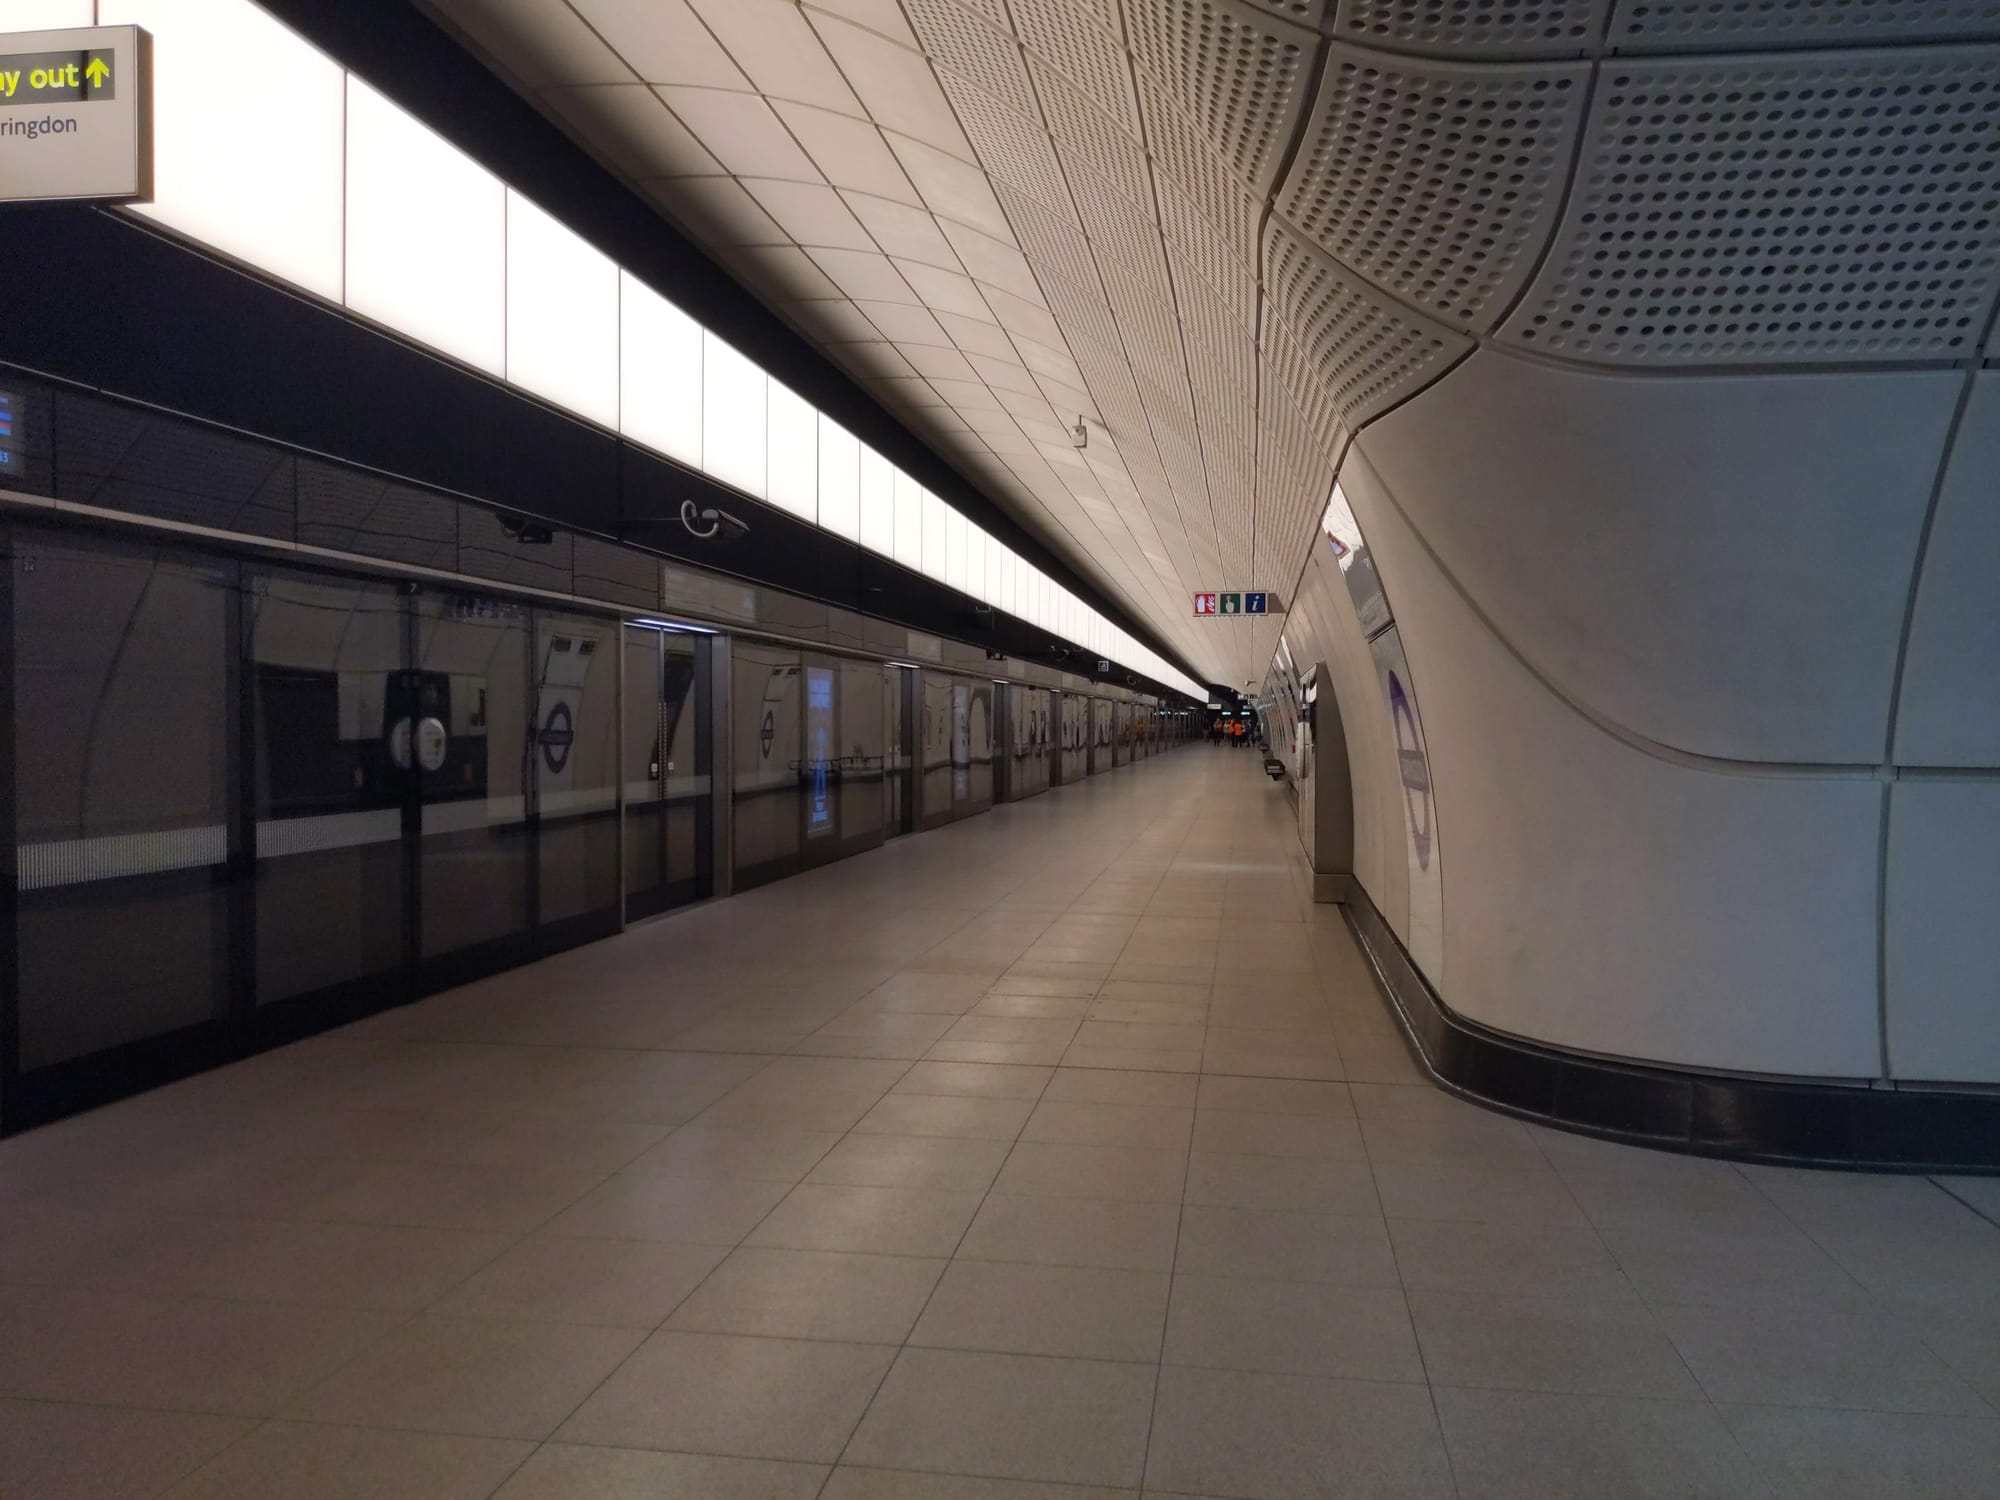 On the left are tinted platform screen doors. The wall extends to the ceiling of the arched platform and has a row of wide LED panels along the top. In the centre is the rest of the platform, which is several metres wide. The end of the platform in the background can hardly be seen.